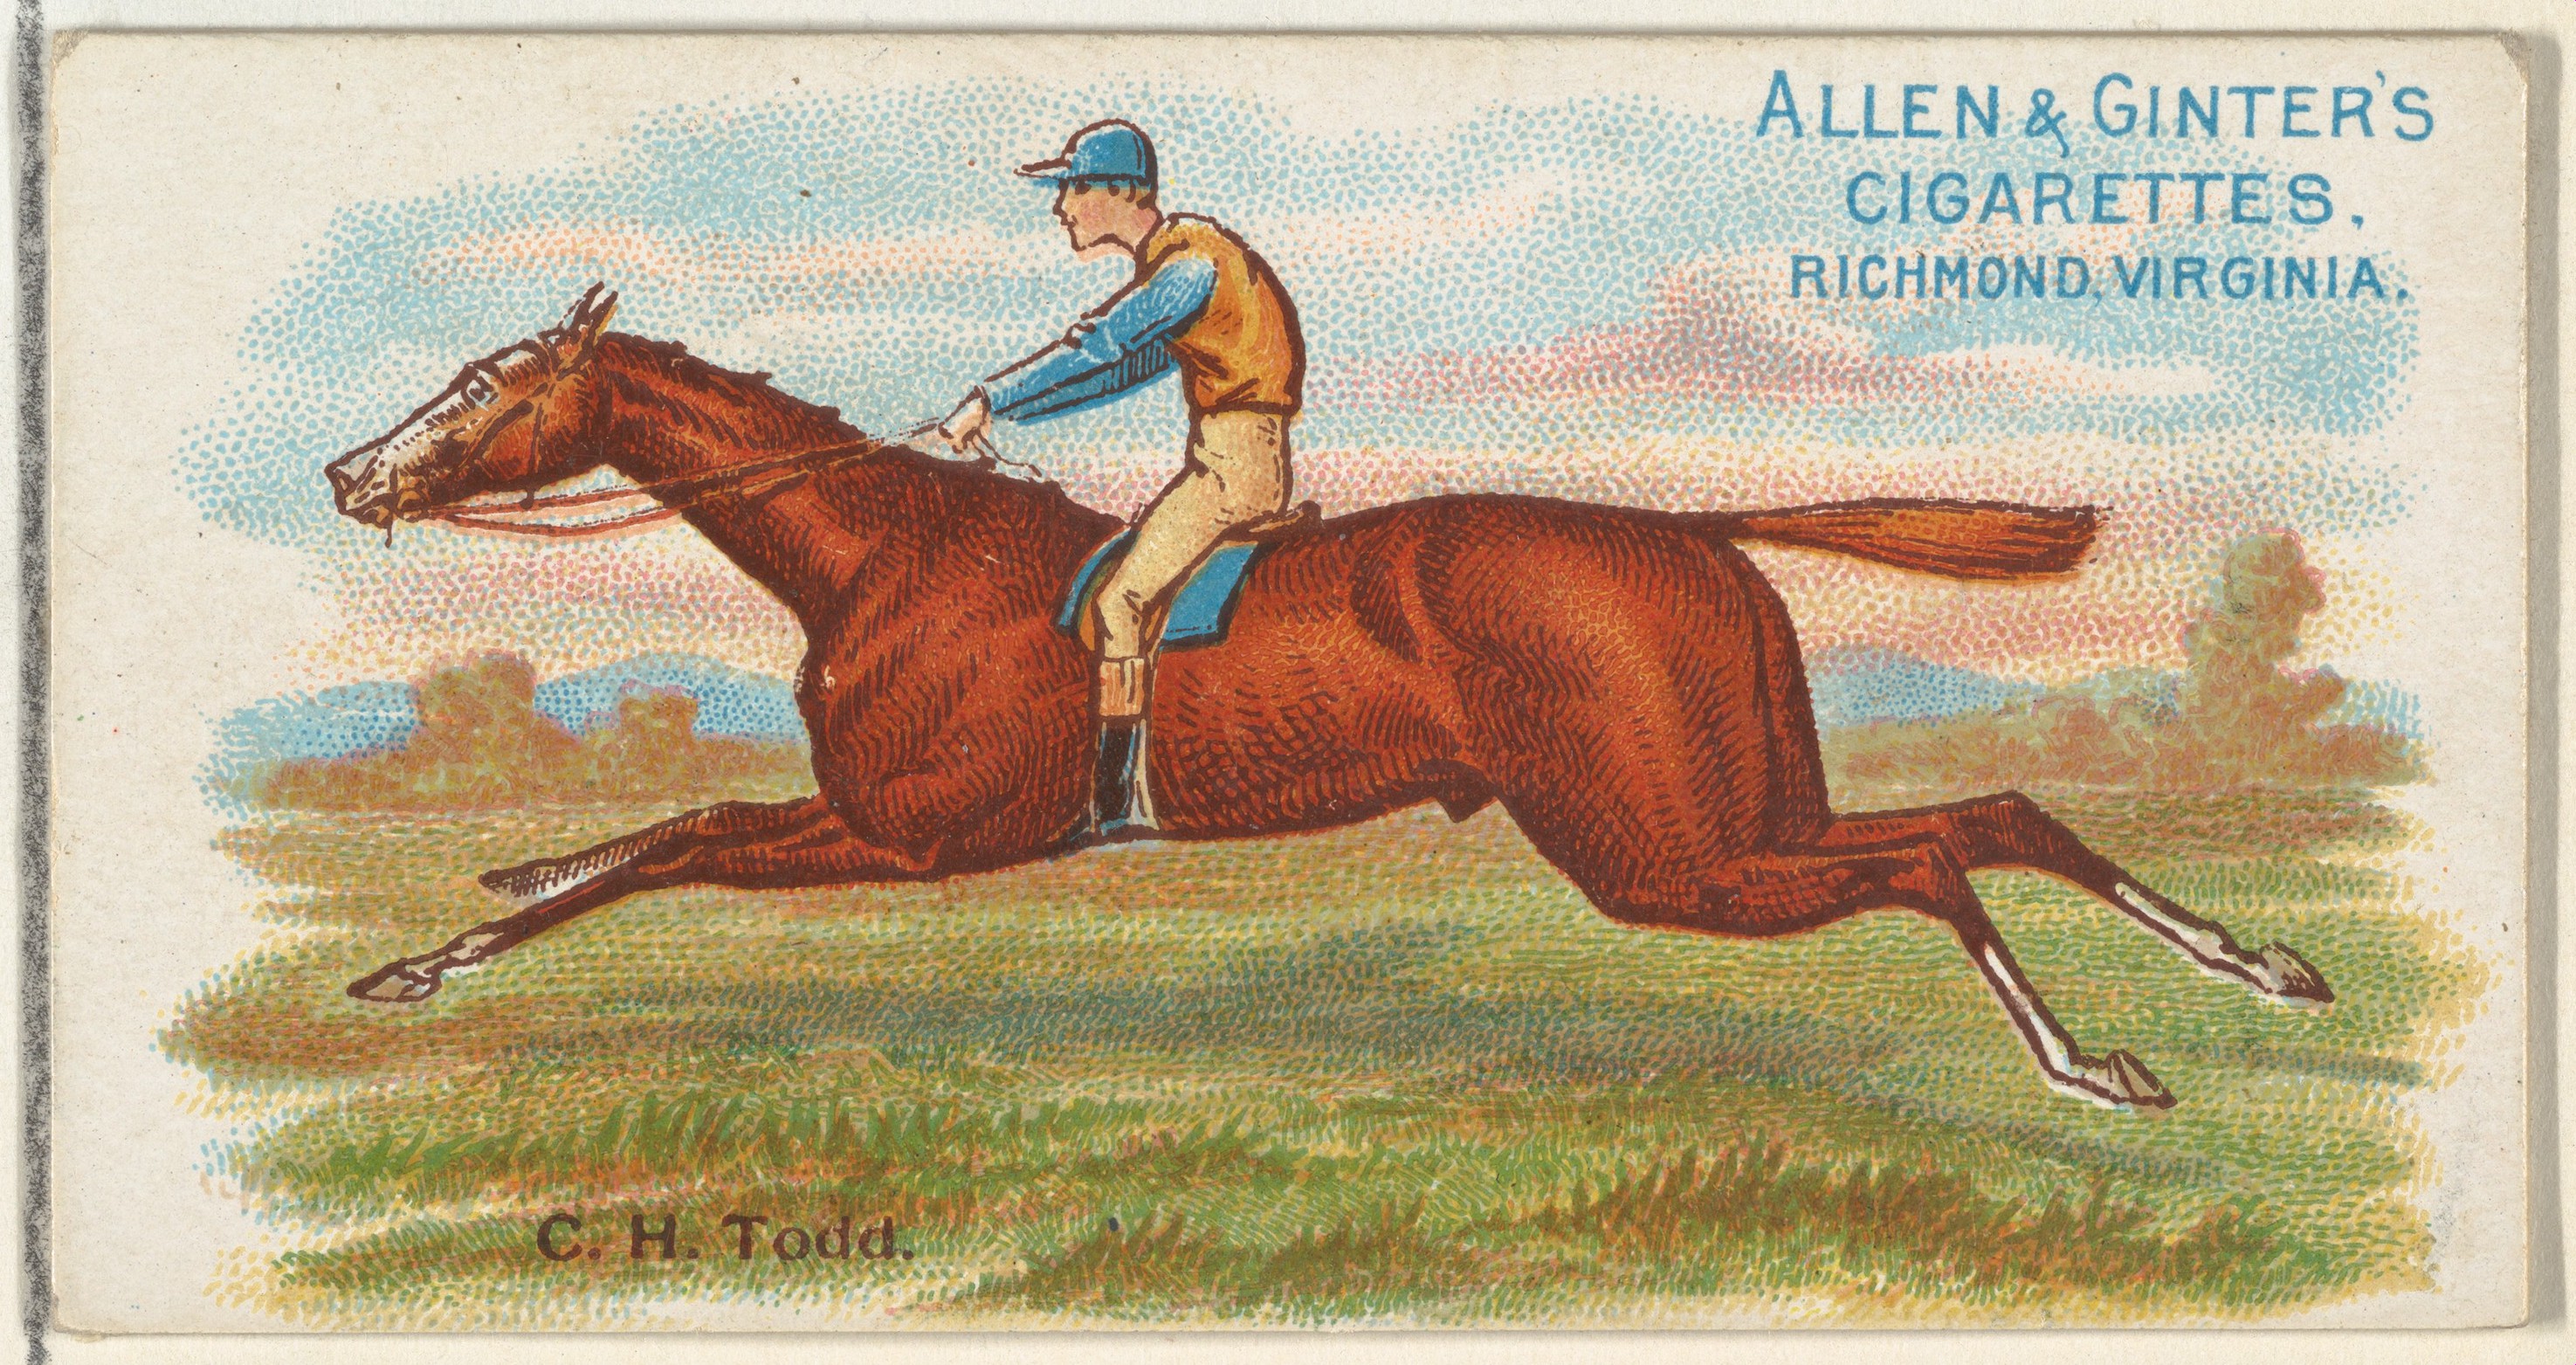 Issued by Allen & Ginter | C.H. Todd, from The World's Racers series ...